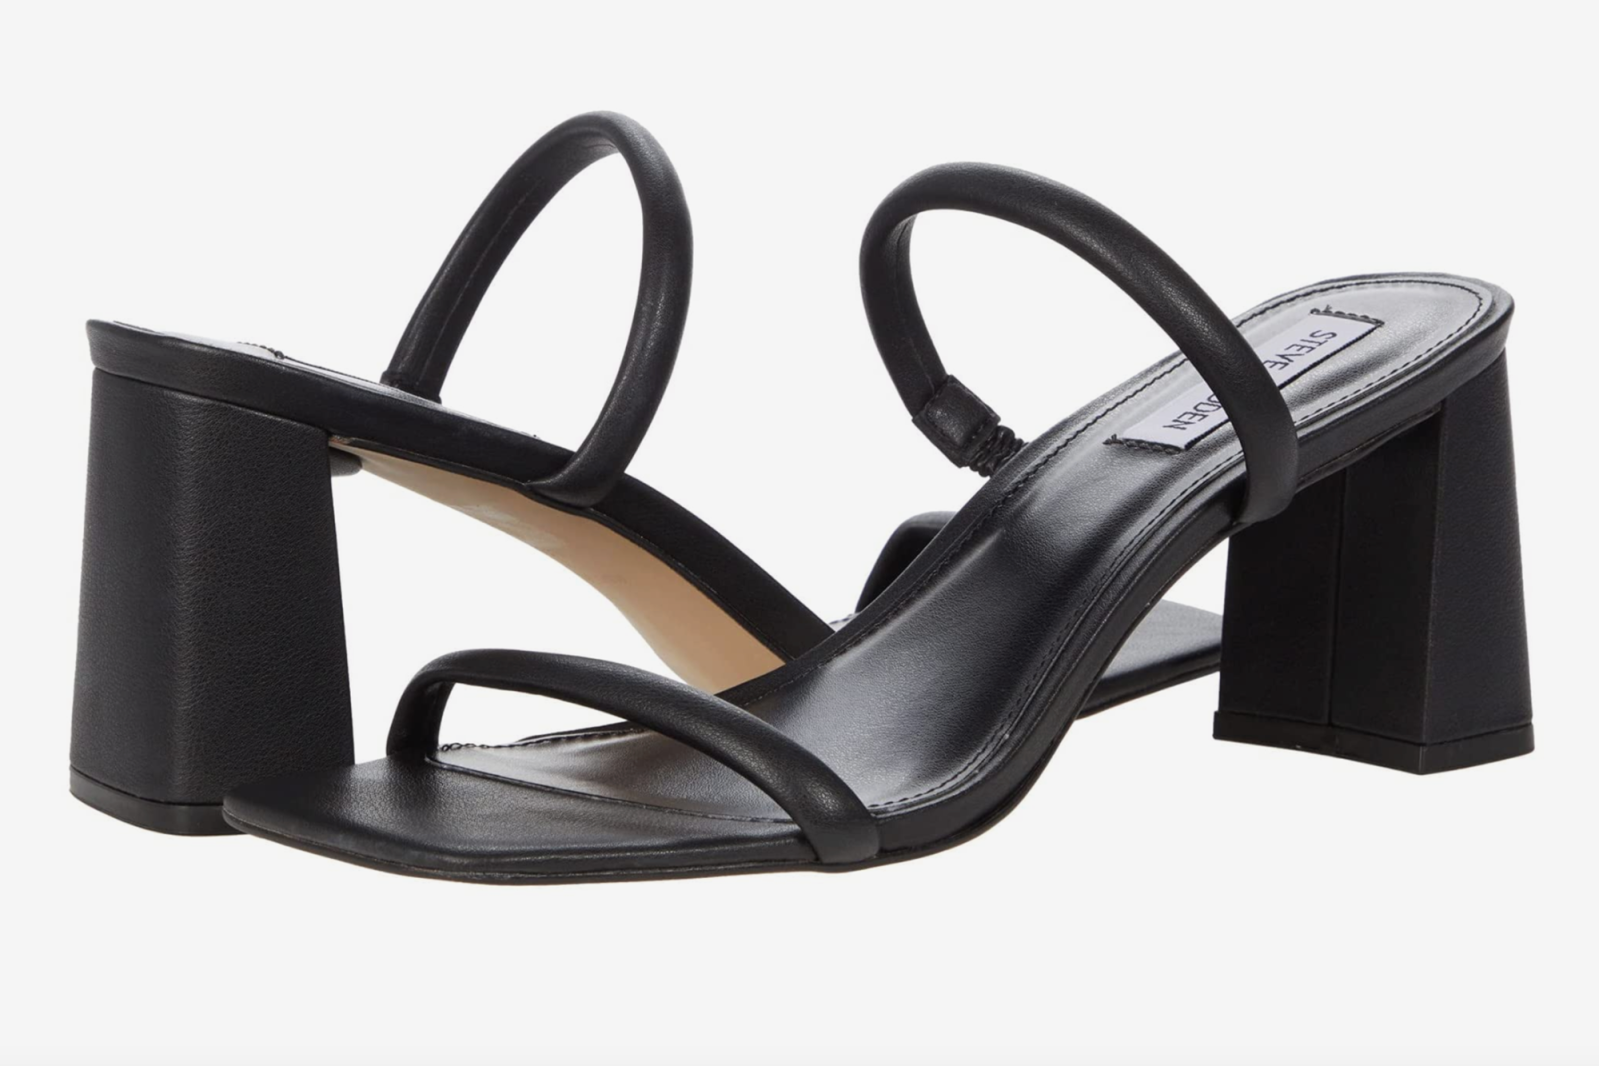 Shop These 7 Stylish Sandals for Spring From Zappos